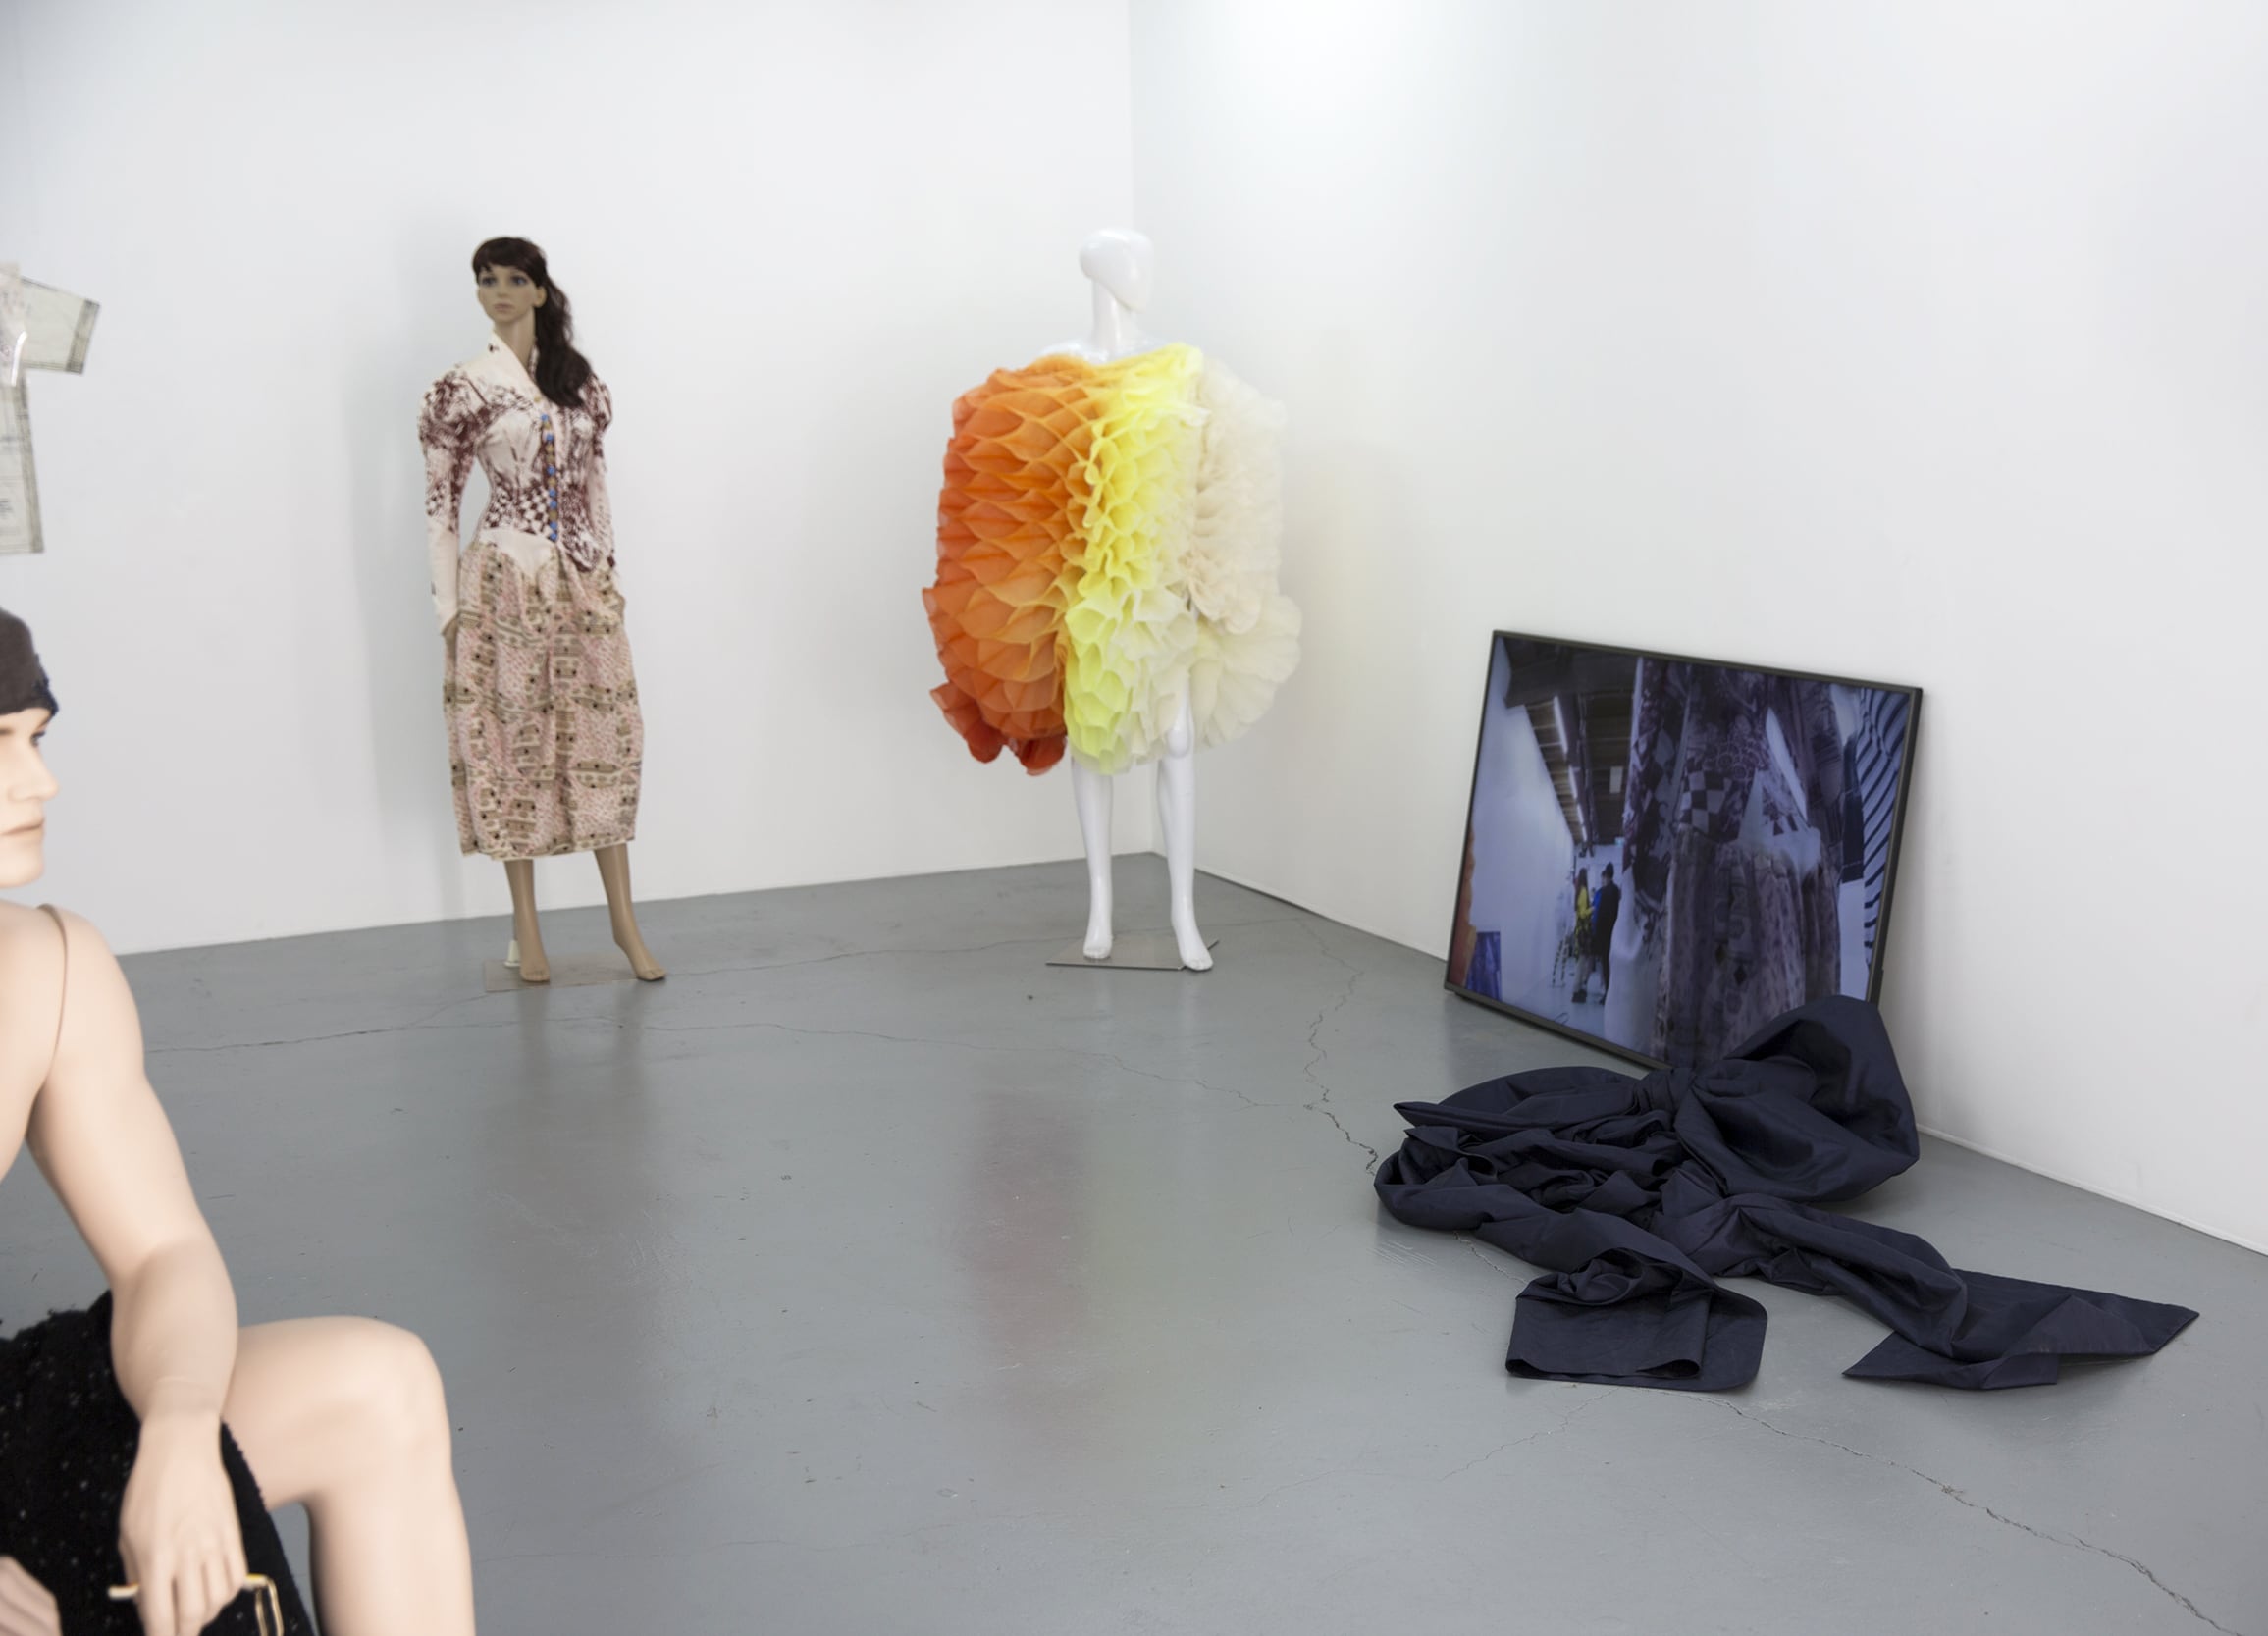 Image 02: Installation view, Gallery 1 L-R: Women’s History Museum, Orange peel fugitive purple optical dress, 2018, screen printed bodice, C. 1860 quilting print skirt, and Czech deco buttons; Zhuxuan He, Untitled, 2016, Hand-dyed silk organza; Megan Hanson, ‘…it loves
without condition or discrimination, but only once the material labour of its construction has been dismissed.’, 2018, performance video. Image: Rafaela Pandolfini.